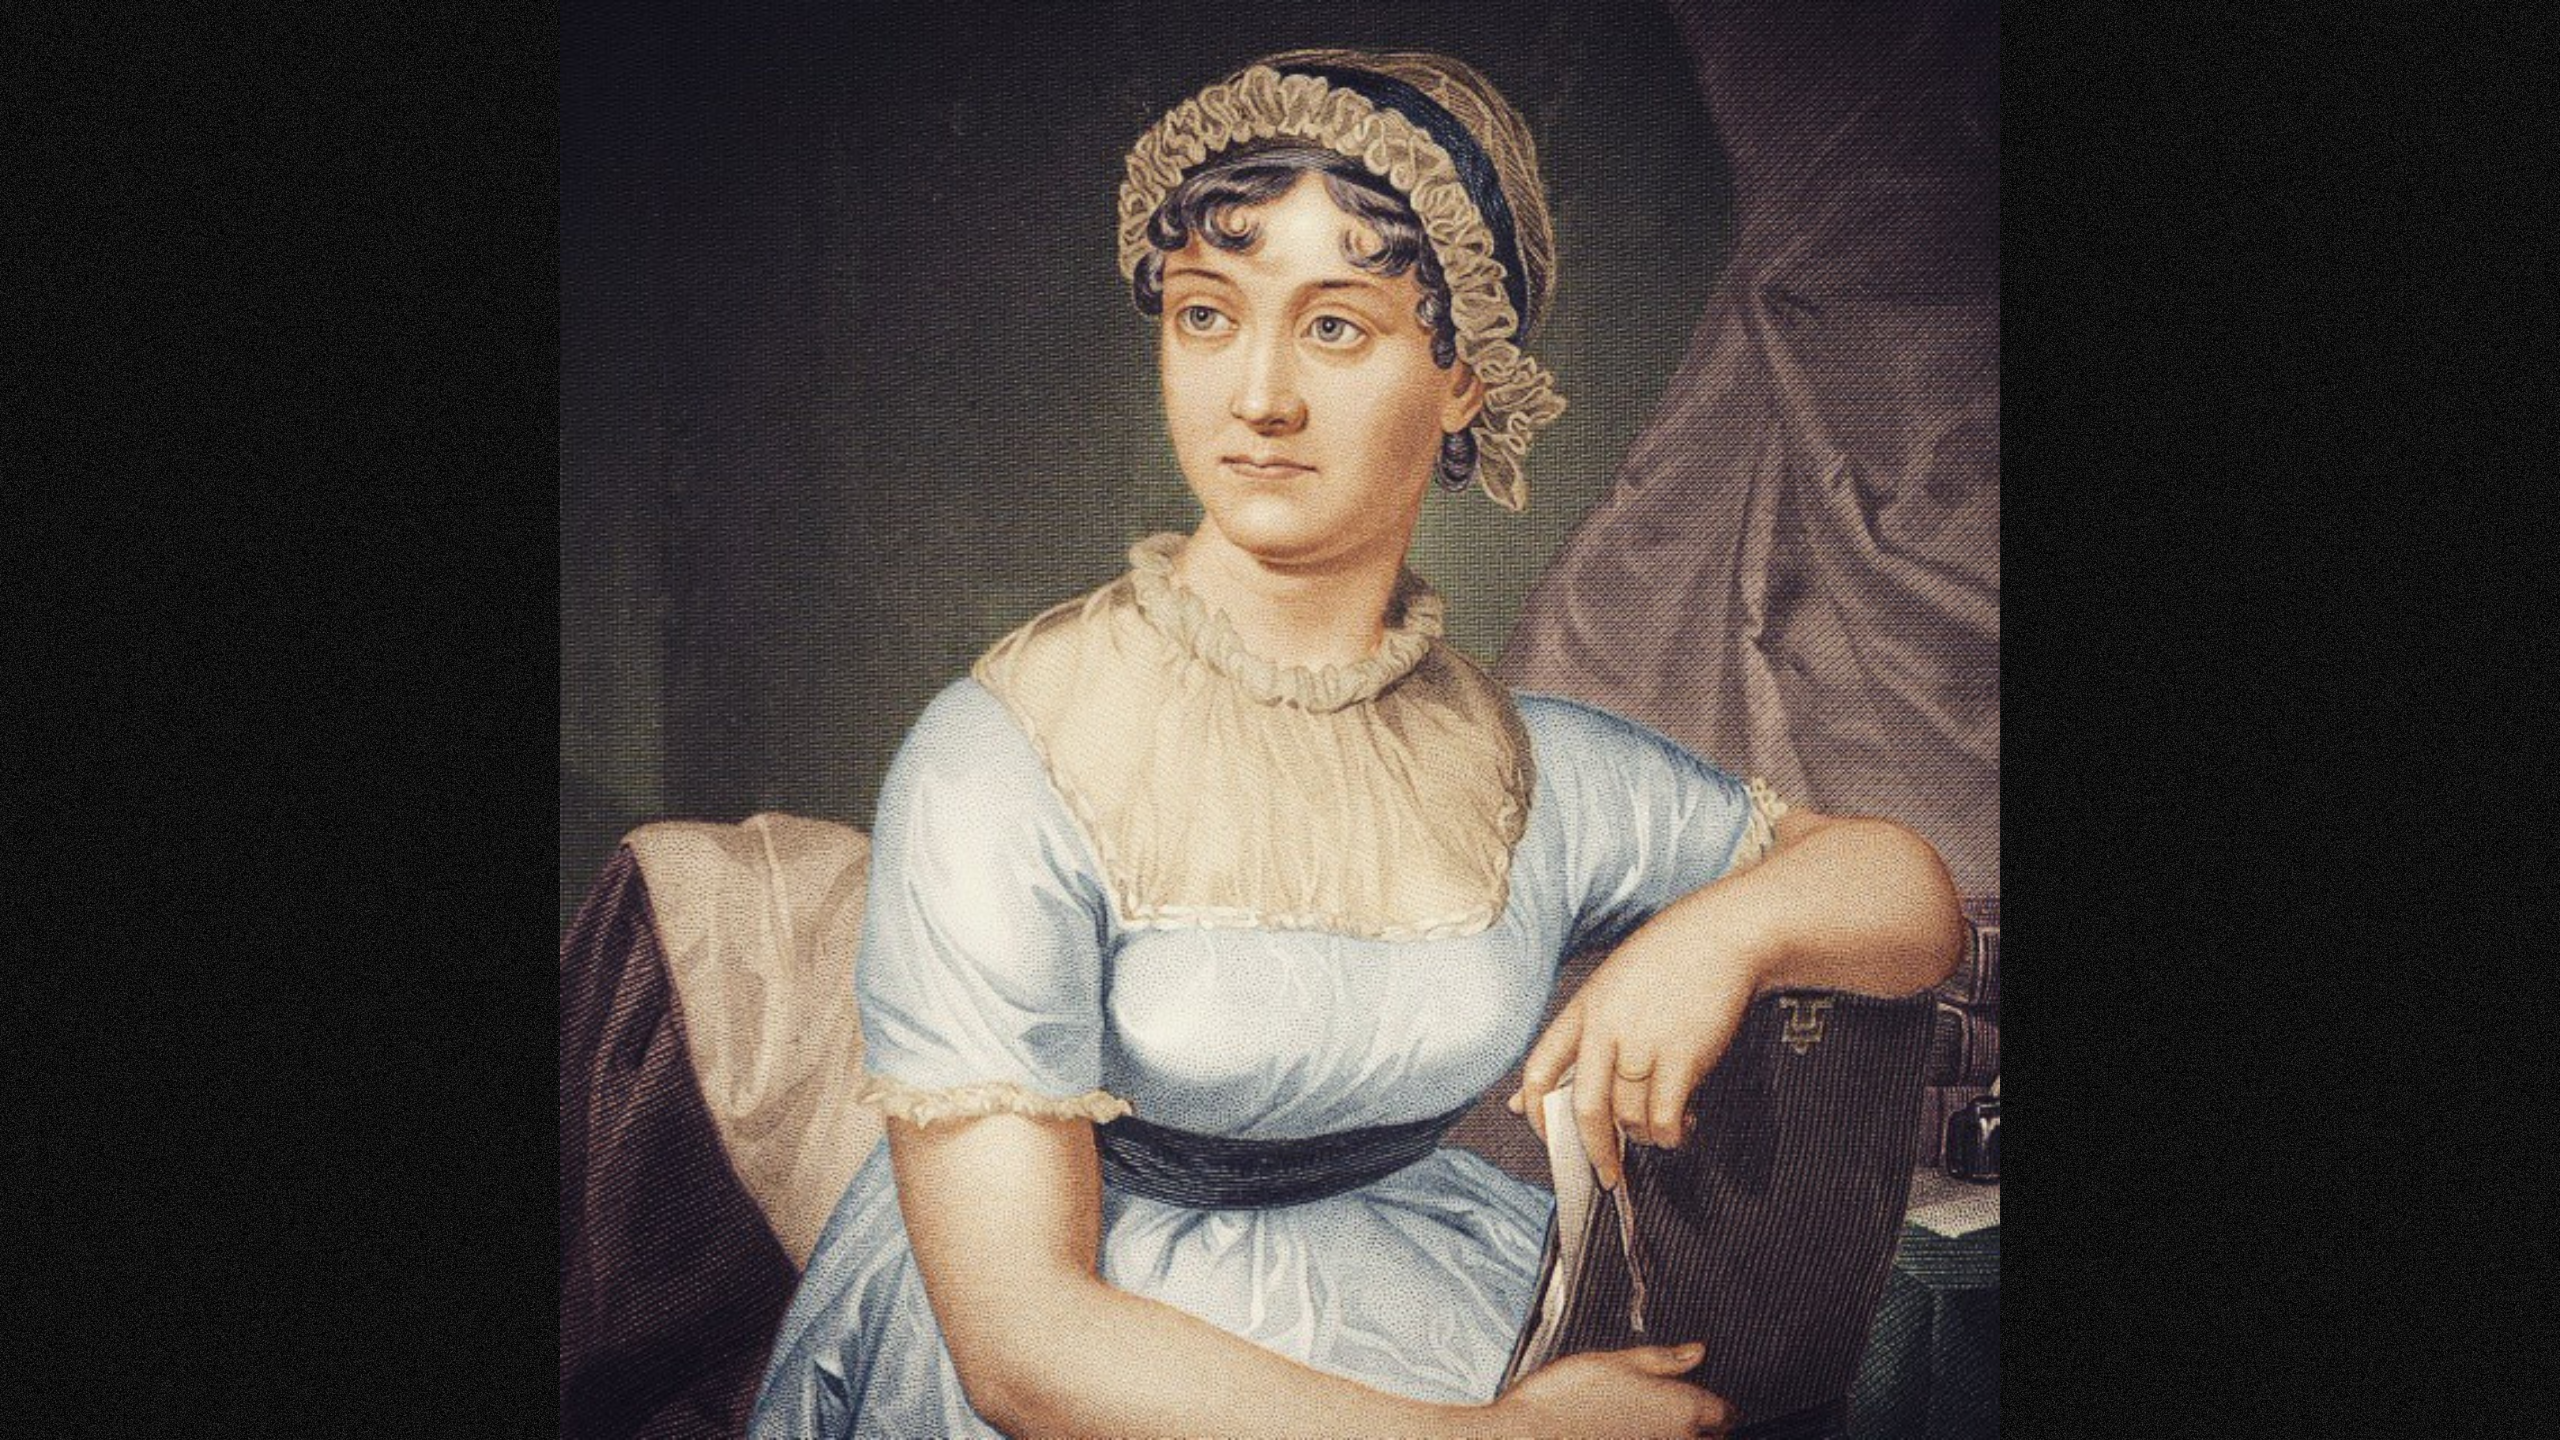 Jane Austen (PhoebeZu/Flickr/Attribution-NonCommercial-NoDerivs 2.0 Generic license) https://creativecommons.org/licenses/by-nc-nd/2.0/